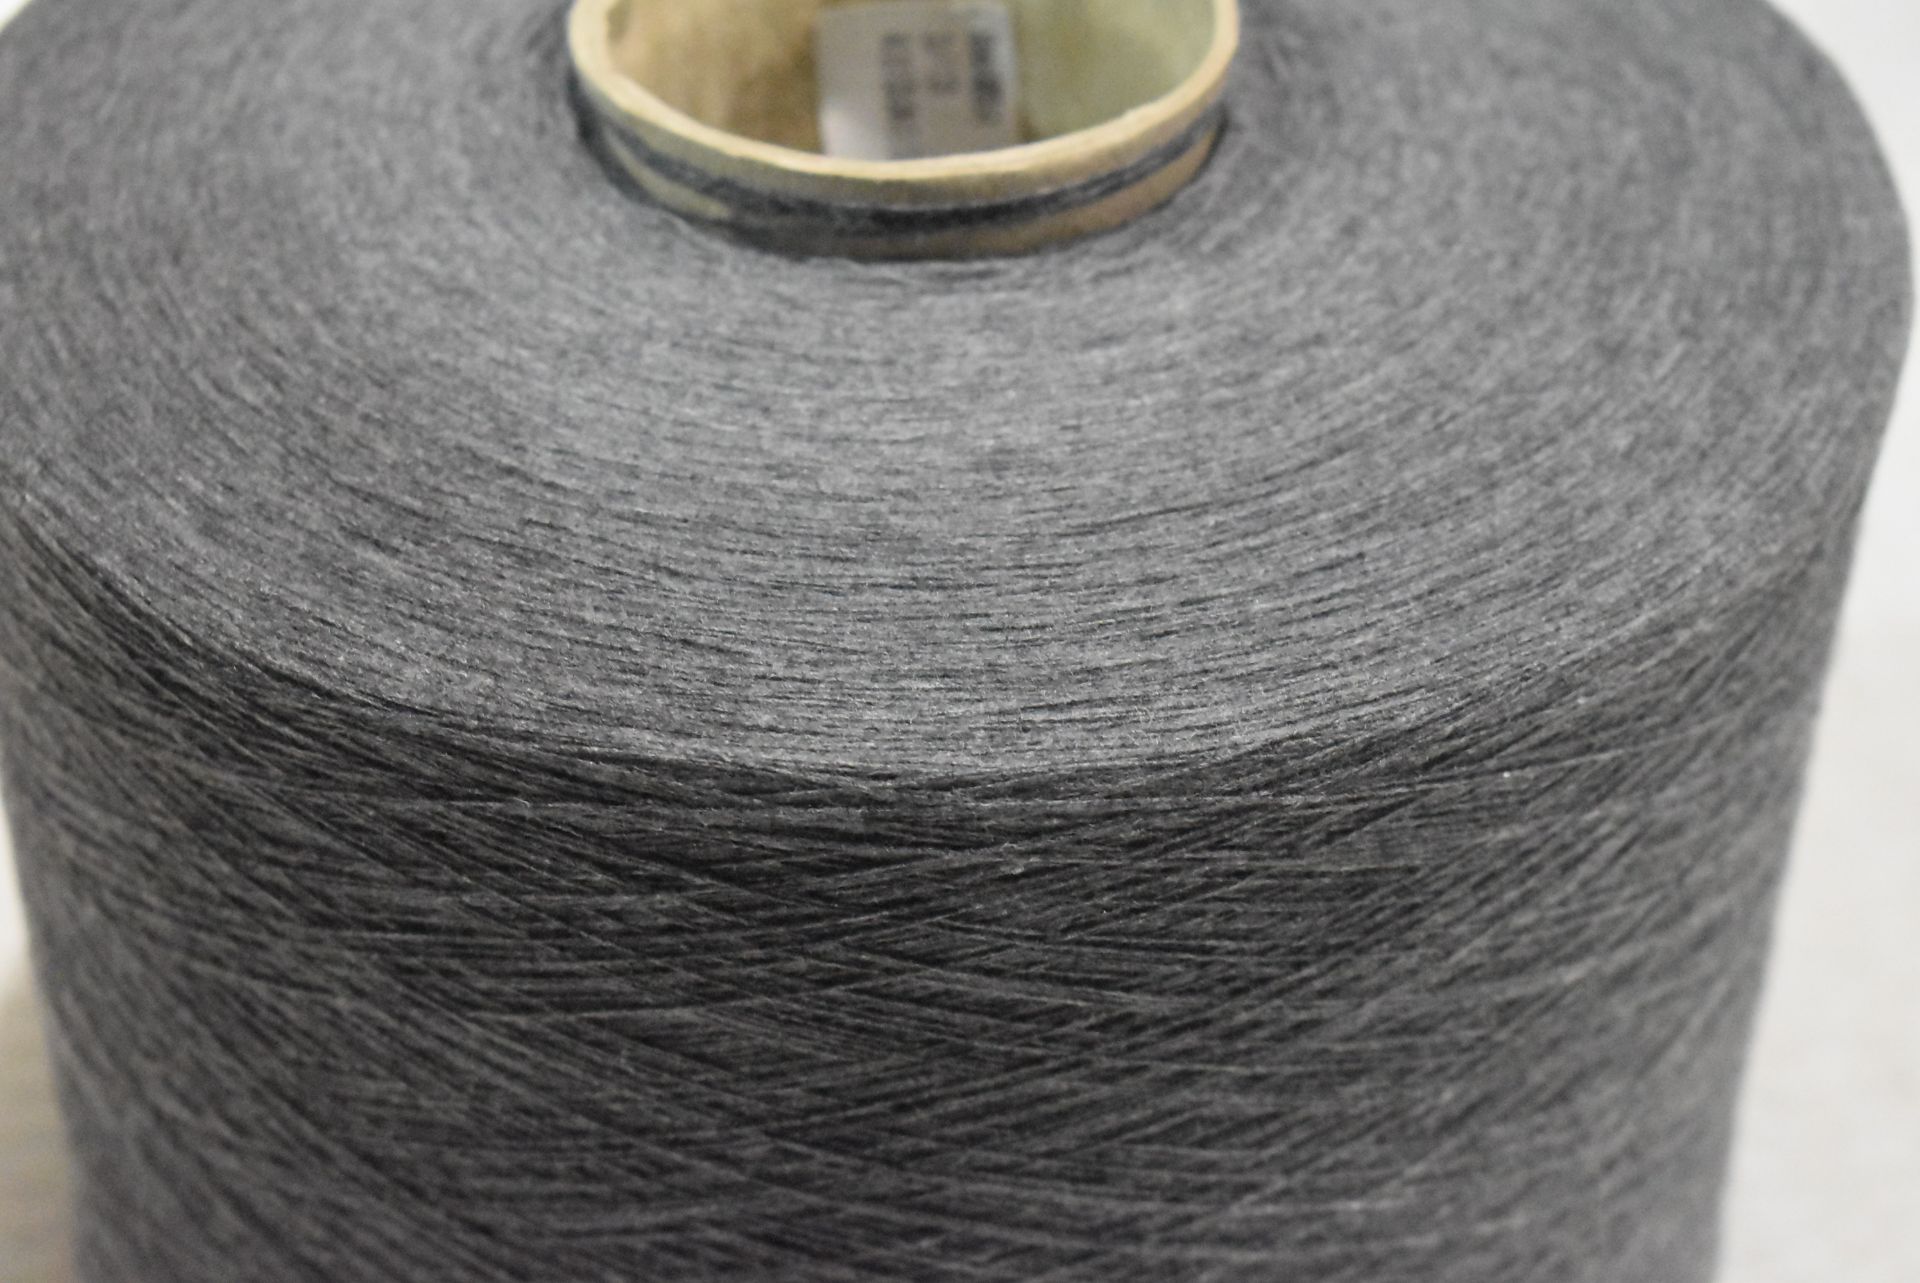 1 x Cone of 1/13 MicroCotton Knitting Yarn - Mid Grey - Approx Weight: 2,500g - New Stock ABL Yarn - Image 8 of 18